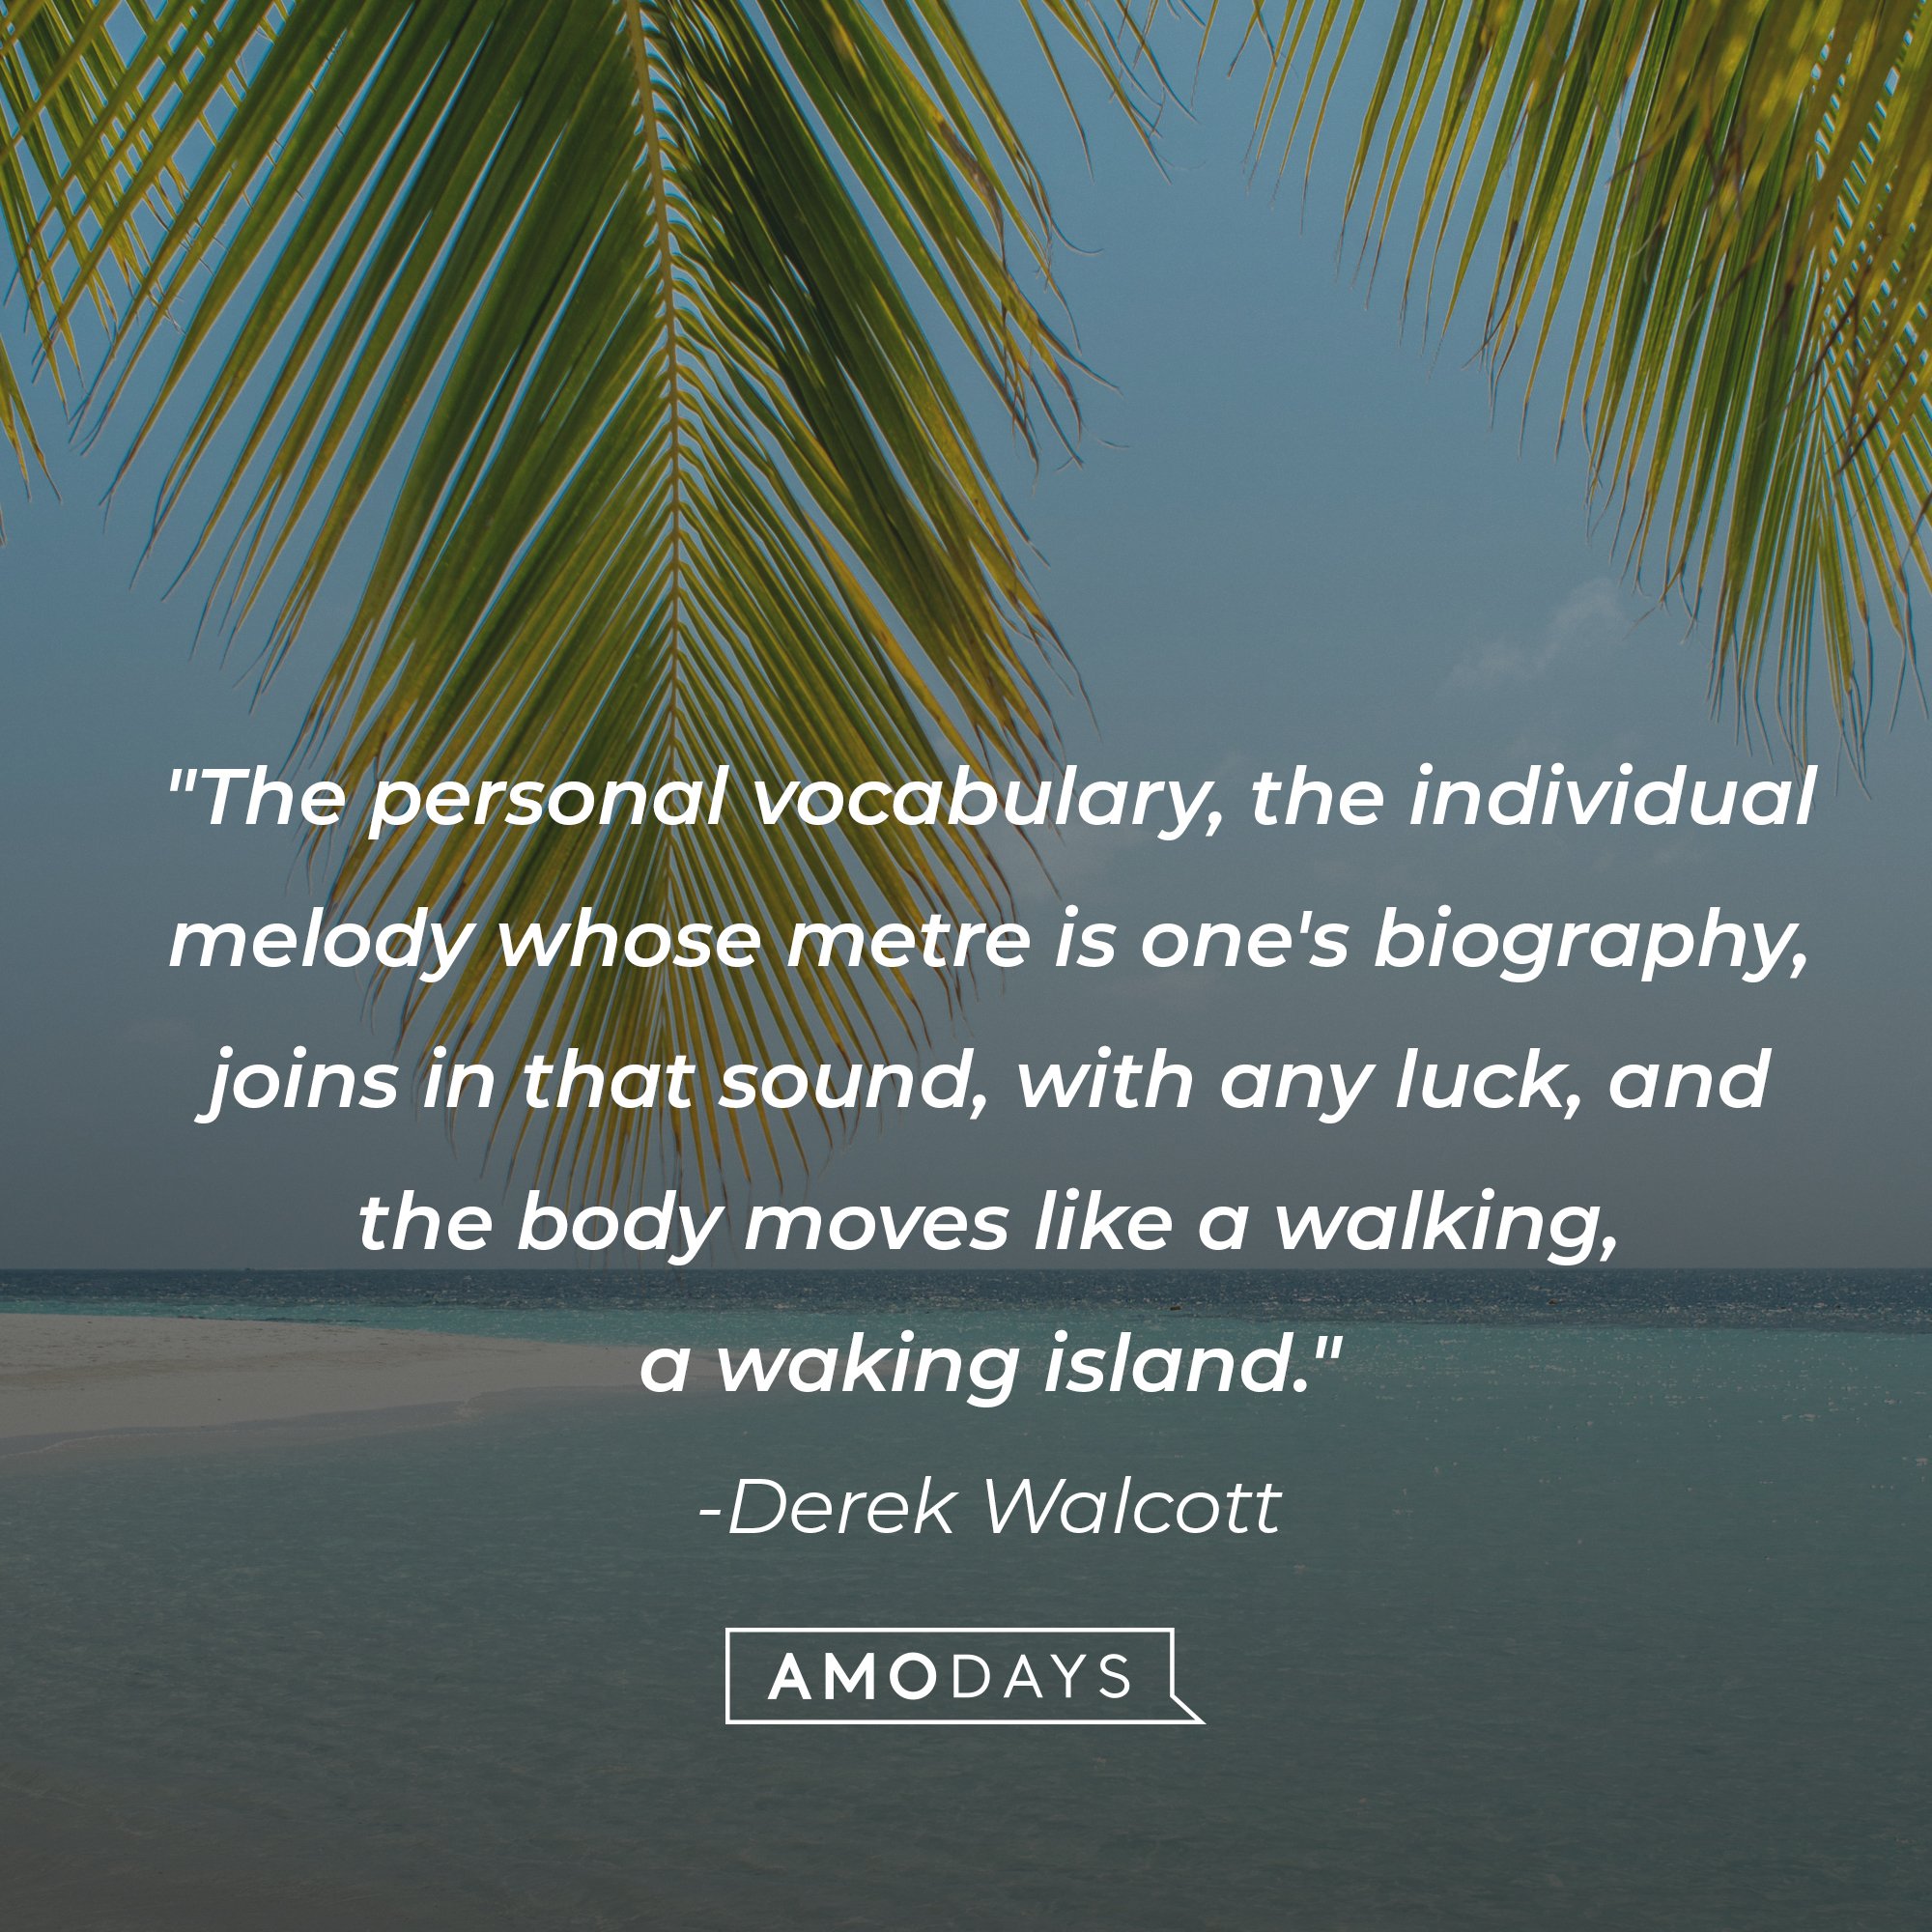 Derek Walcott's quote: "The personal vocabulary, the individual melody whose metre is one's biography, joins in that sound, with any luck, and the body moves like a walking, a waking island." | Image: AmoDays